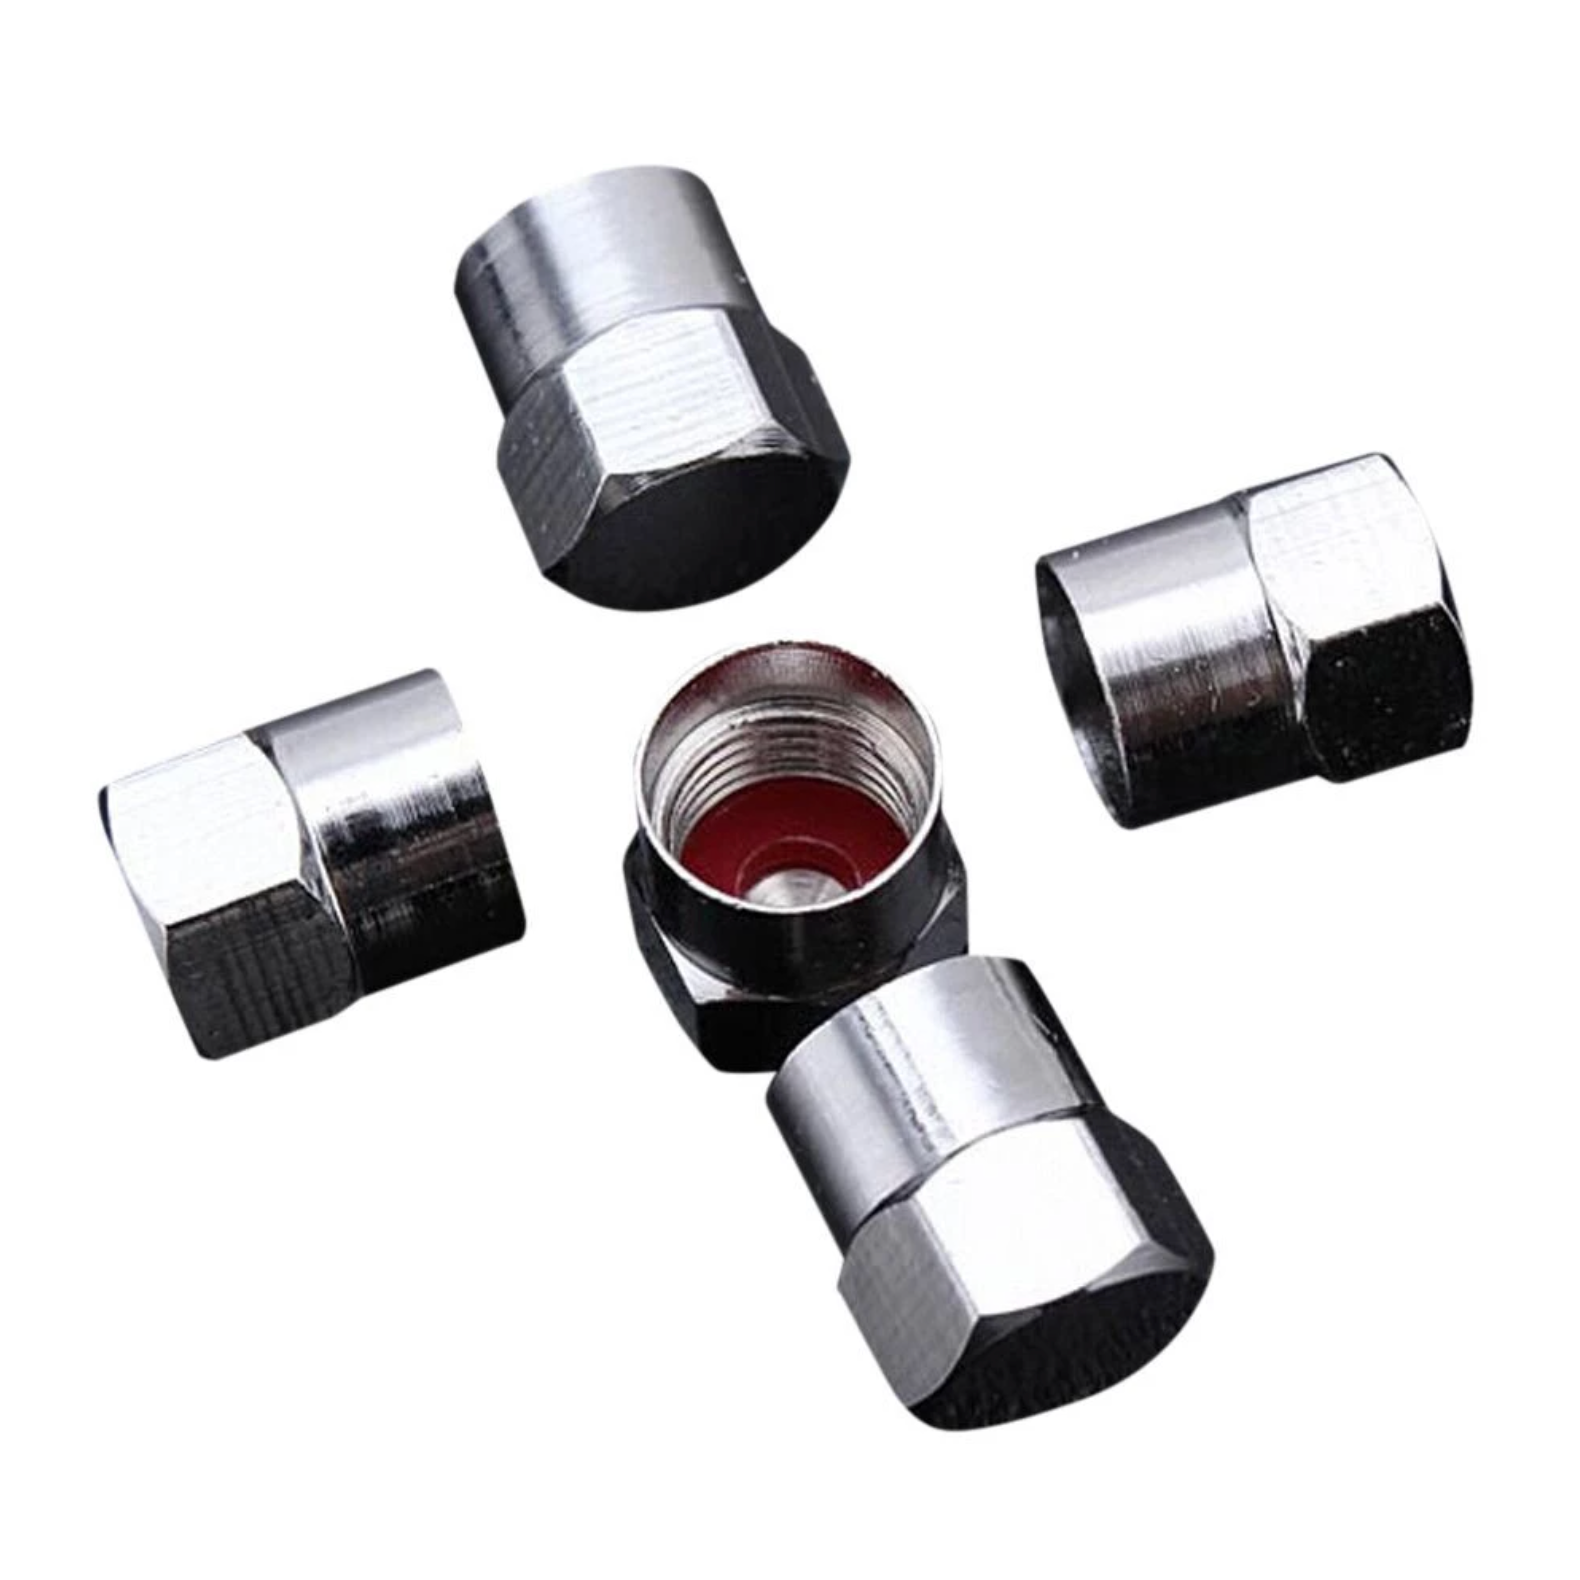 Heavy-Duty Chrome Tire Valve Stem Caps, with Red Rubber O Ring Seal, For Motorcycles, Cars, Trucks & SUVs